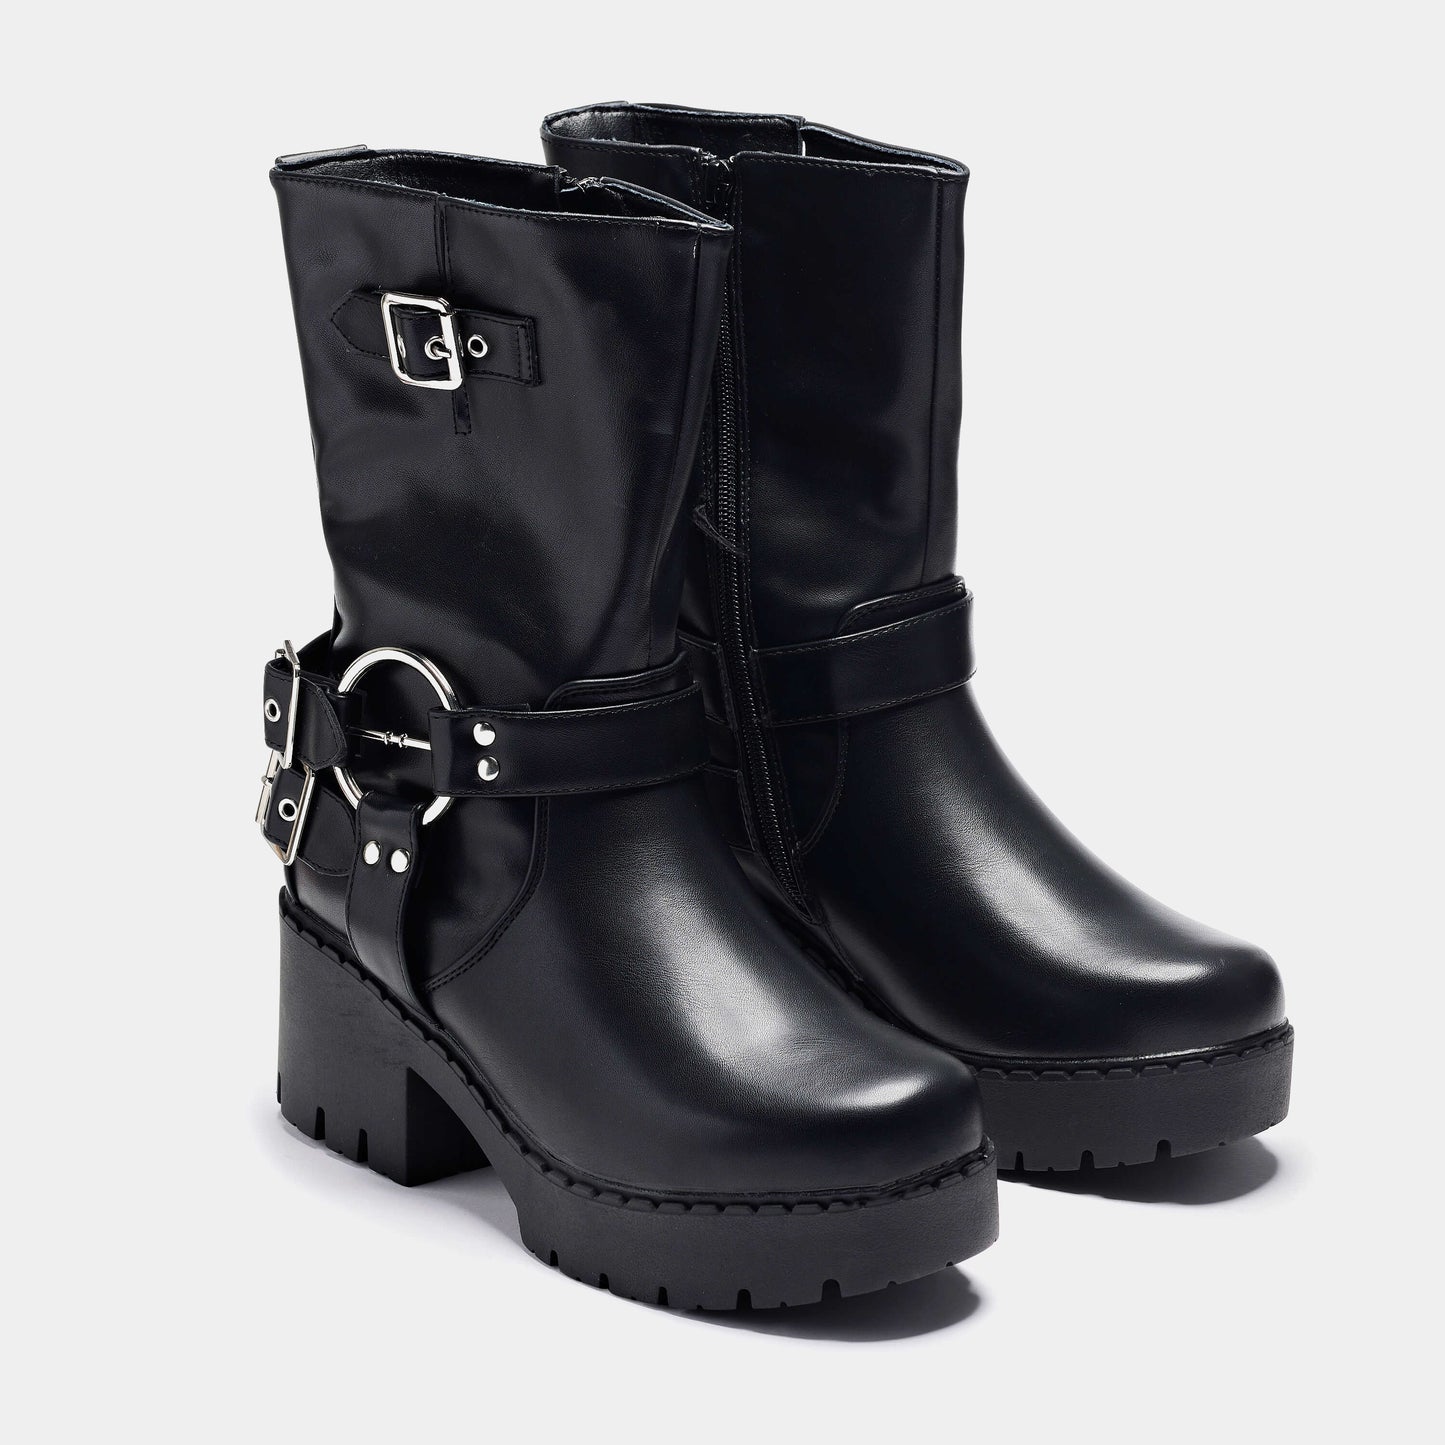 Oblivion Grunge Switch Boots - Ankle Boots - KOI Footwear - Black - Three-Quarter View